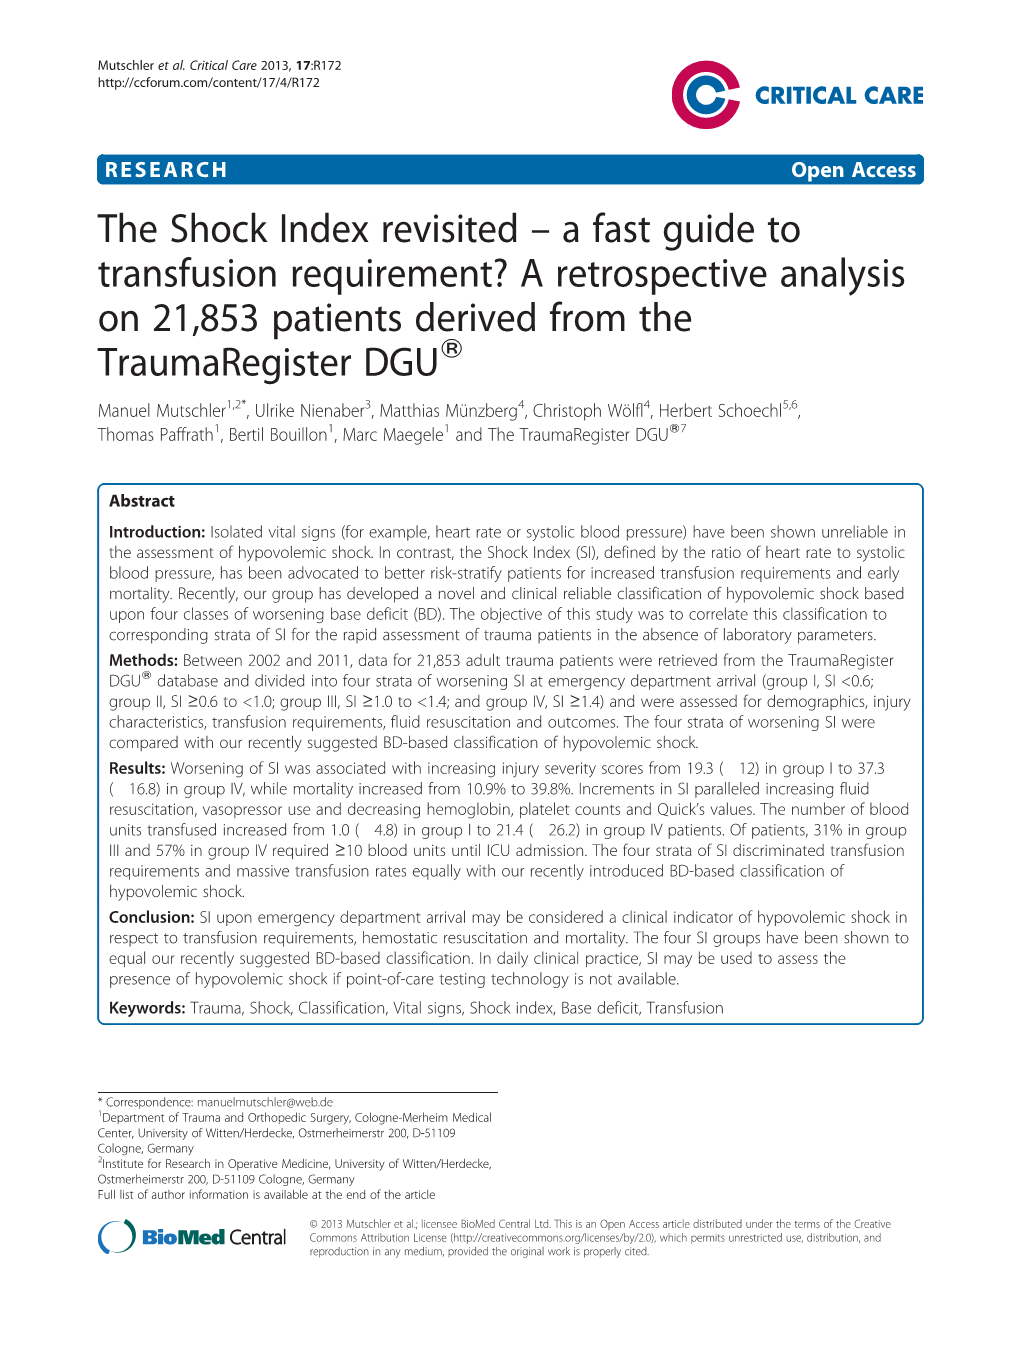 The Shock Index Revisited